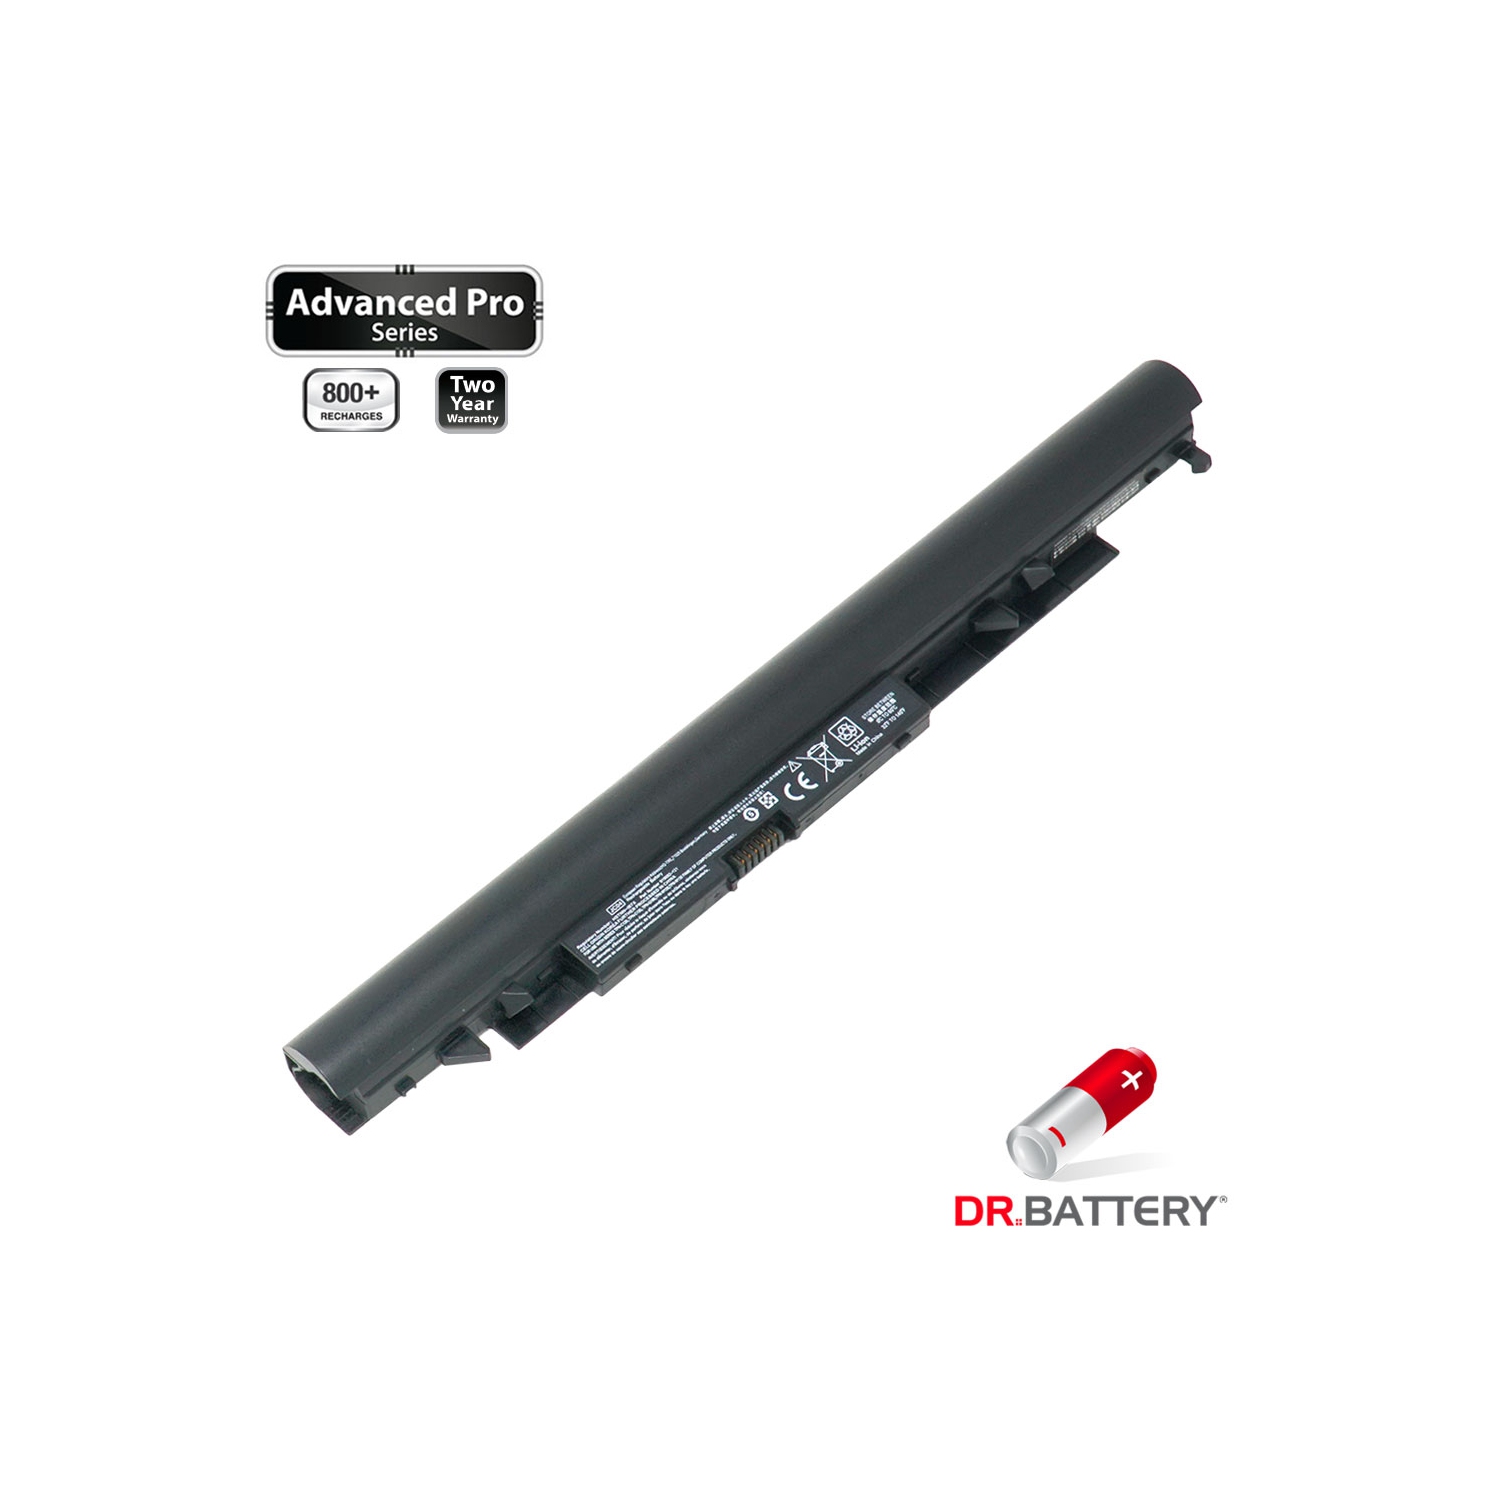 Dr. Battery - Samsung SDI Cells for HP 245 G6 2VY23PA / 250 G6 / 250 G6 1NW57UT / 919682-831 / 919700-850 - Free Shipping